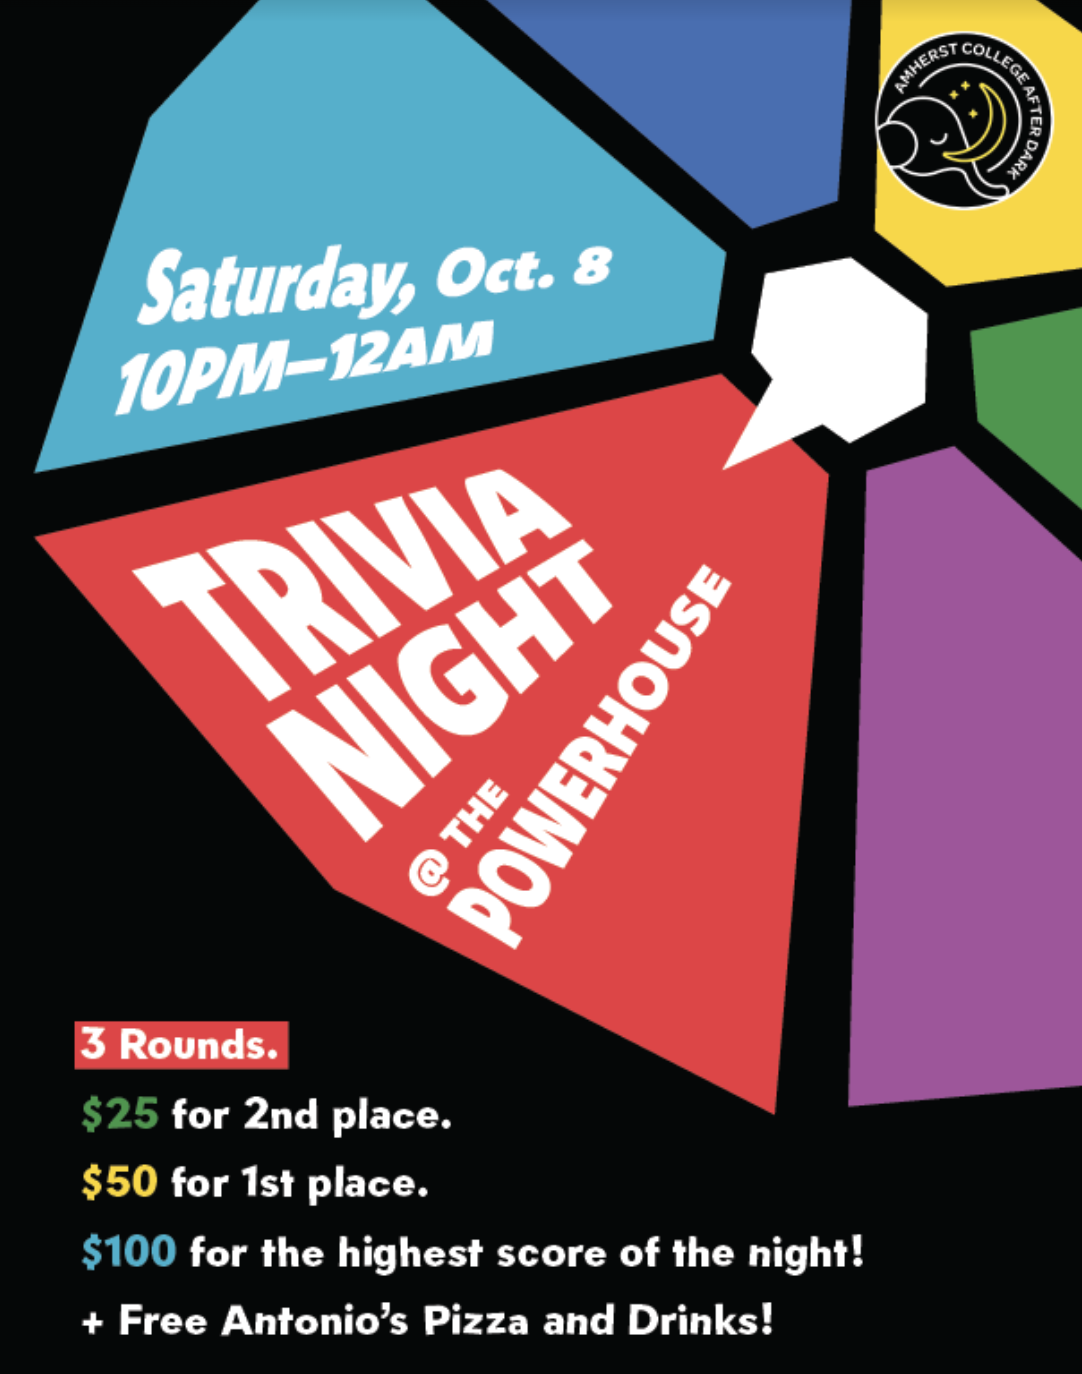 Games for Between Rounds at Trivia Nights